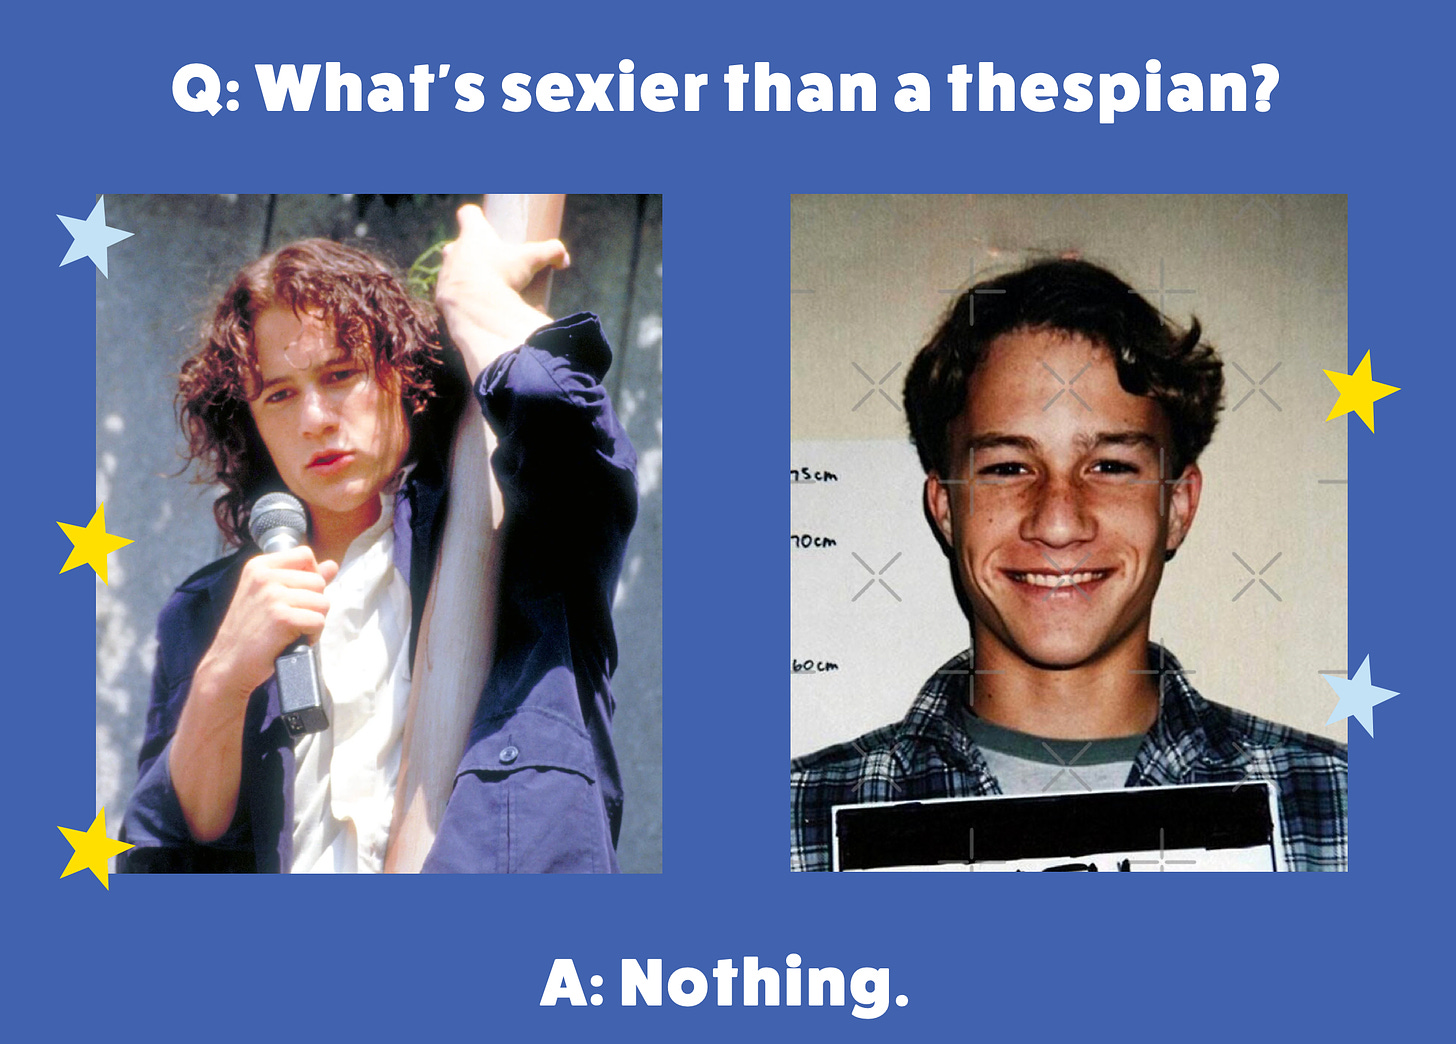 Two pictures of noted hottie Heath Ledger, accompanied, annoyingly, by, "Q: What's sexier than a thespian? A: Nothing."